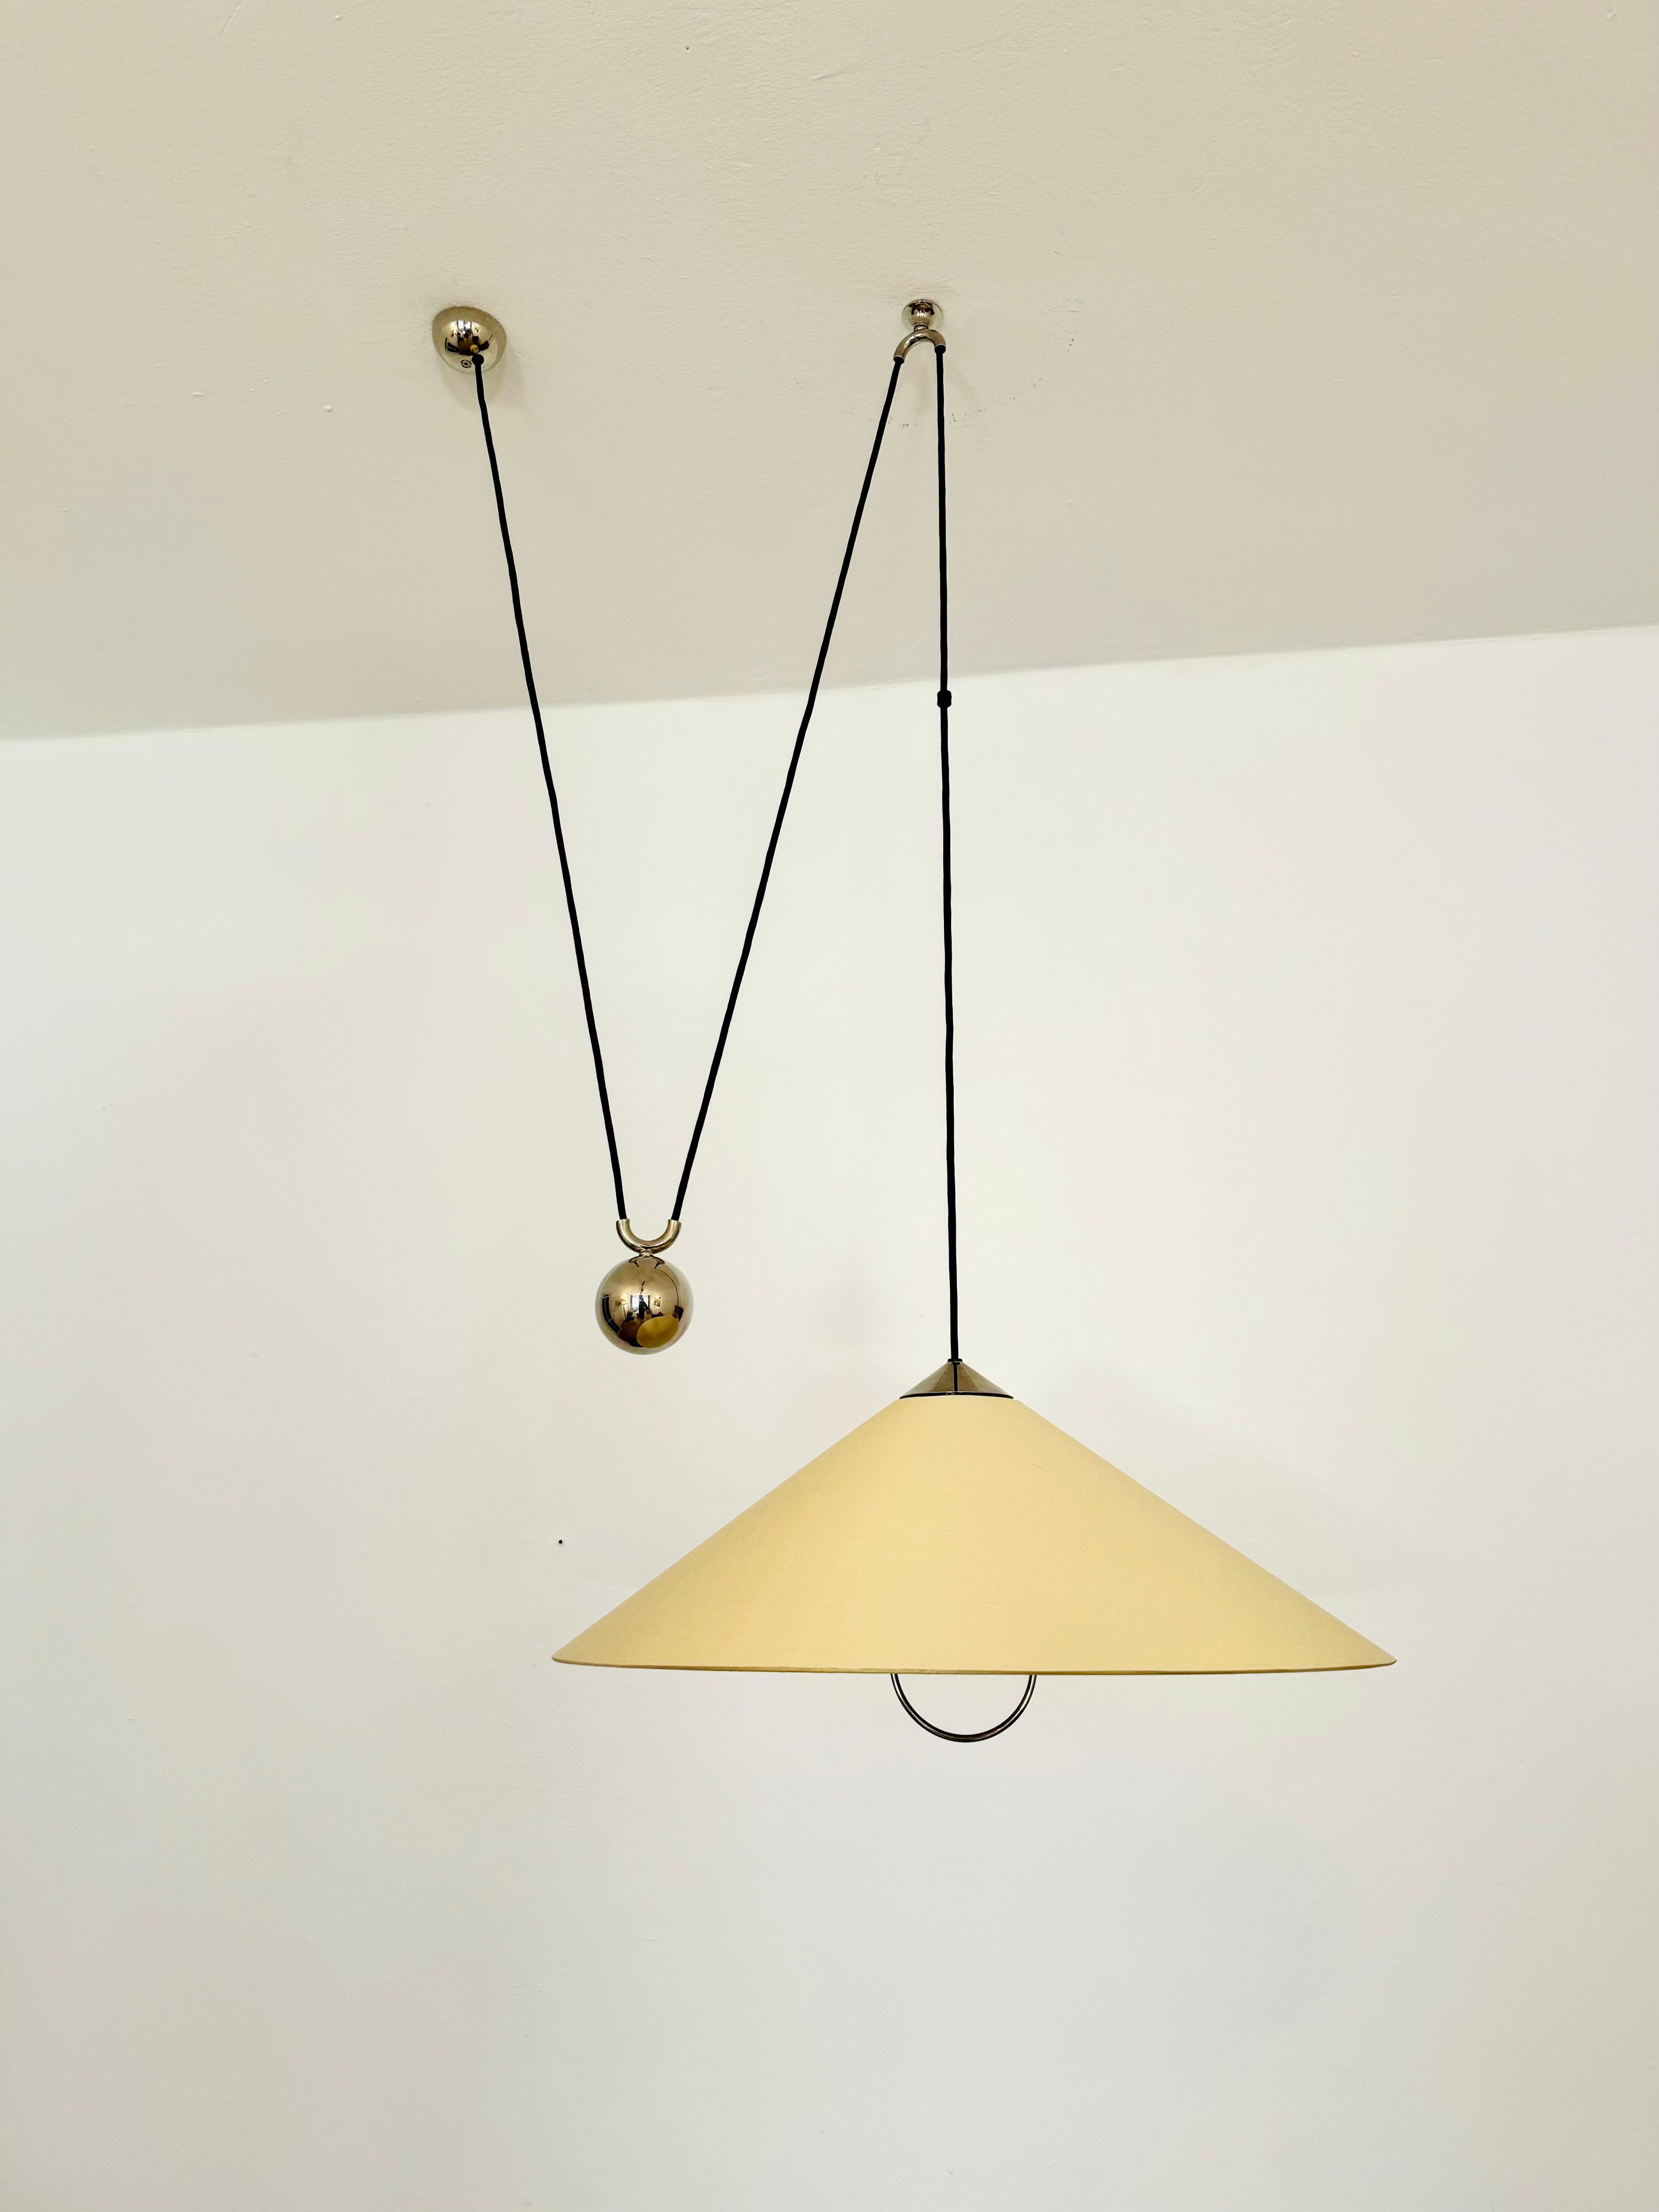 Large Adjustable Pendant Lamp with Counterweight by Florian Schulz In Good Condition For Sale In München, DE